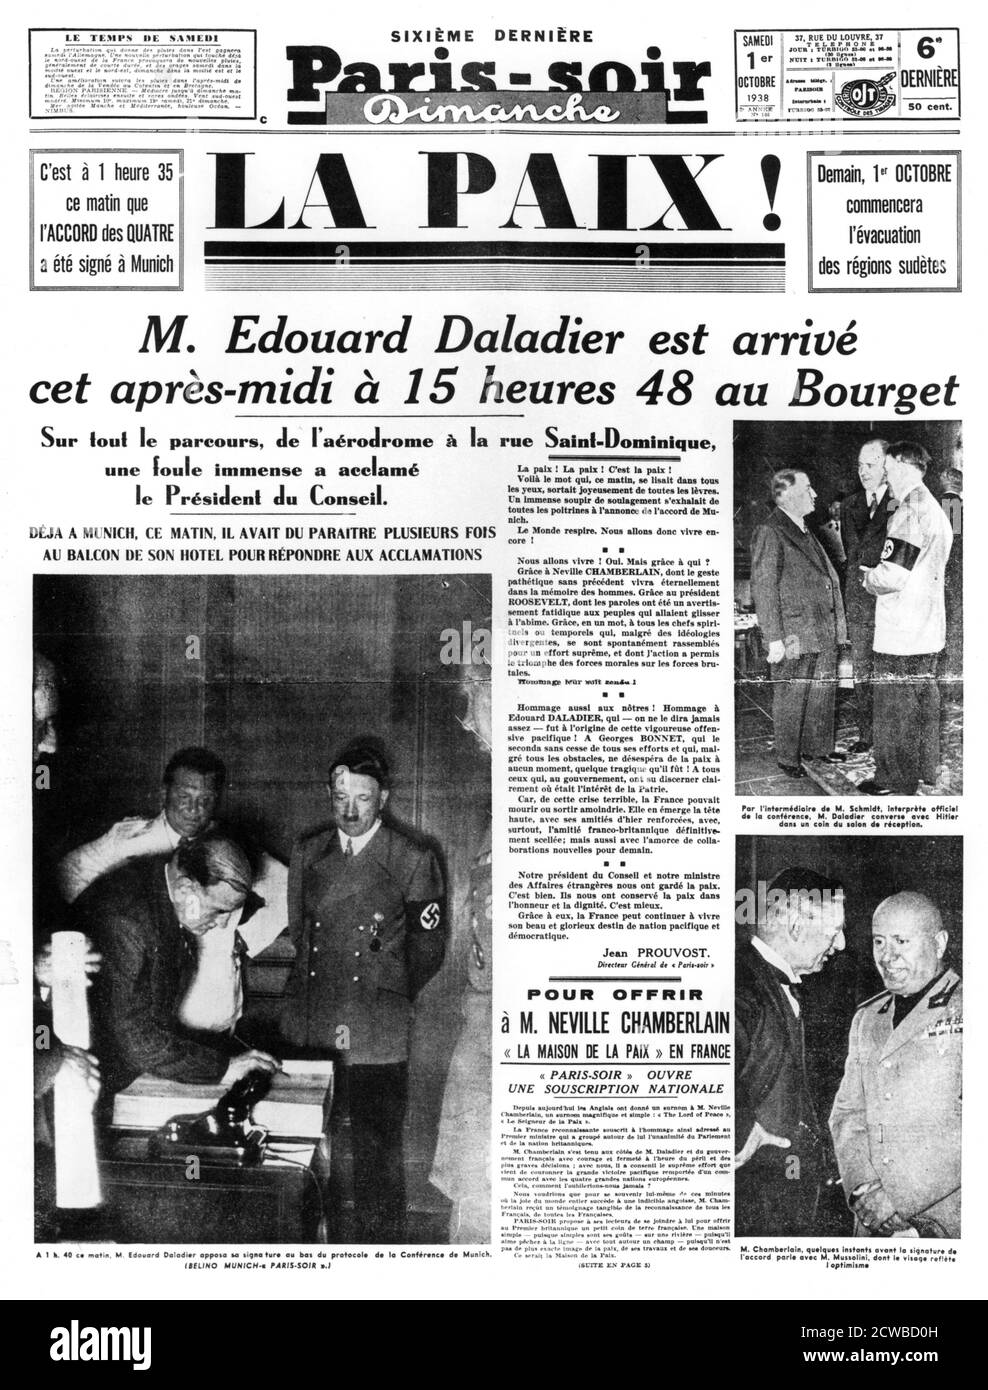 Peace!, front page of Paris-soir newspaper, 1 October 1938. headline story reports the conclusion the peace agreement Munich between Britain, France and Germany that would provide peace in our